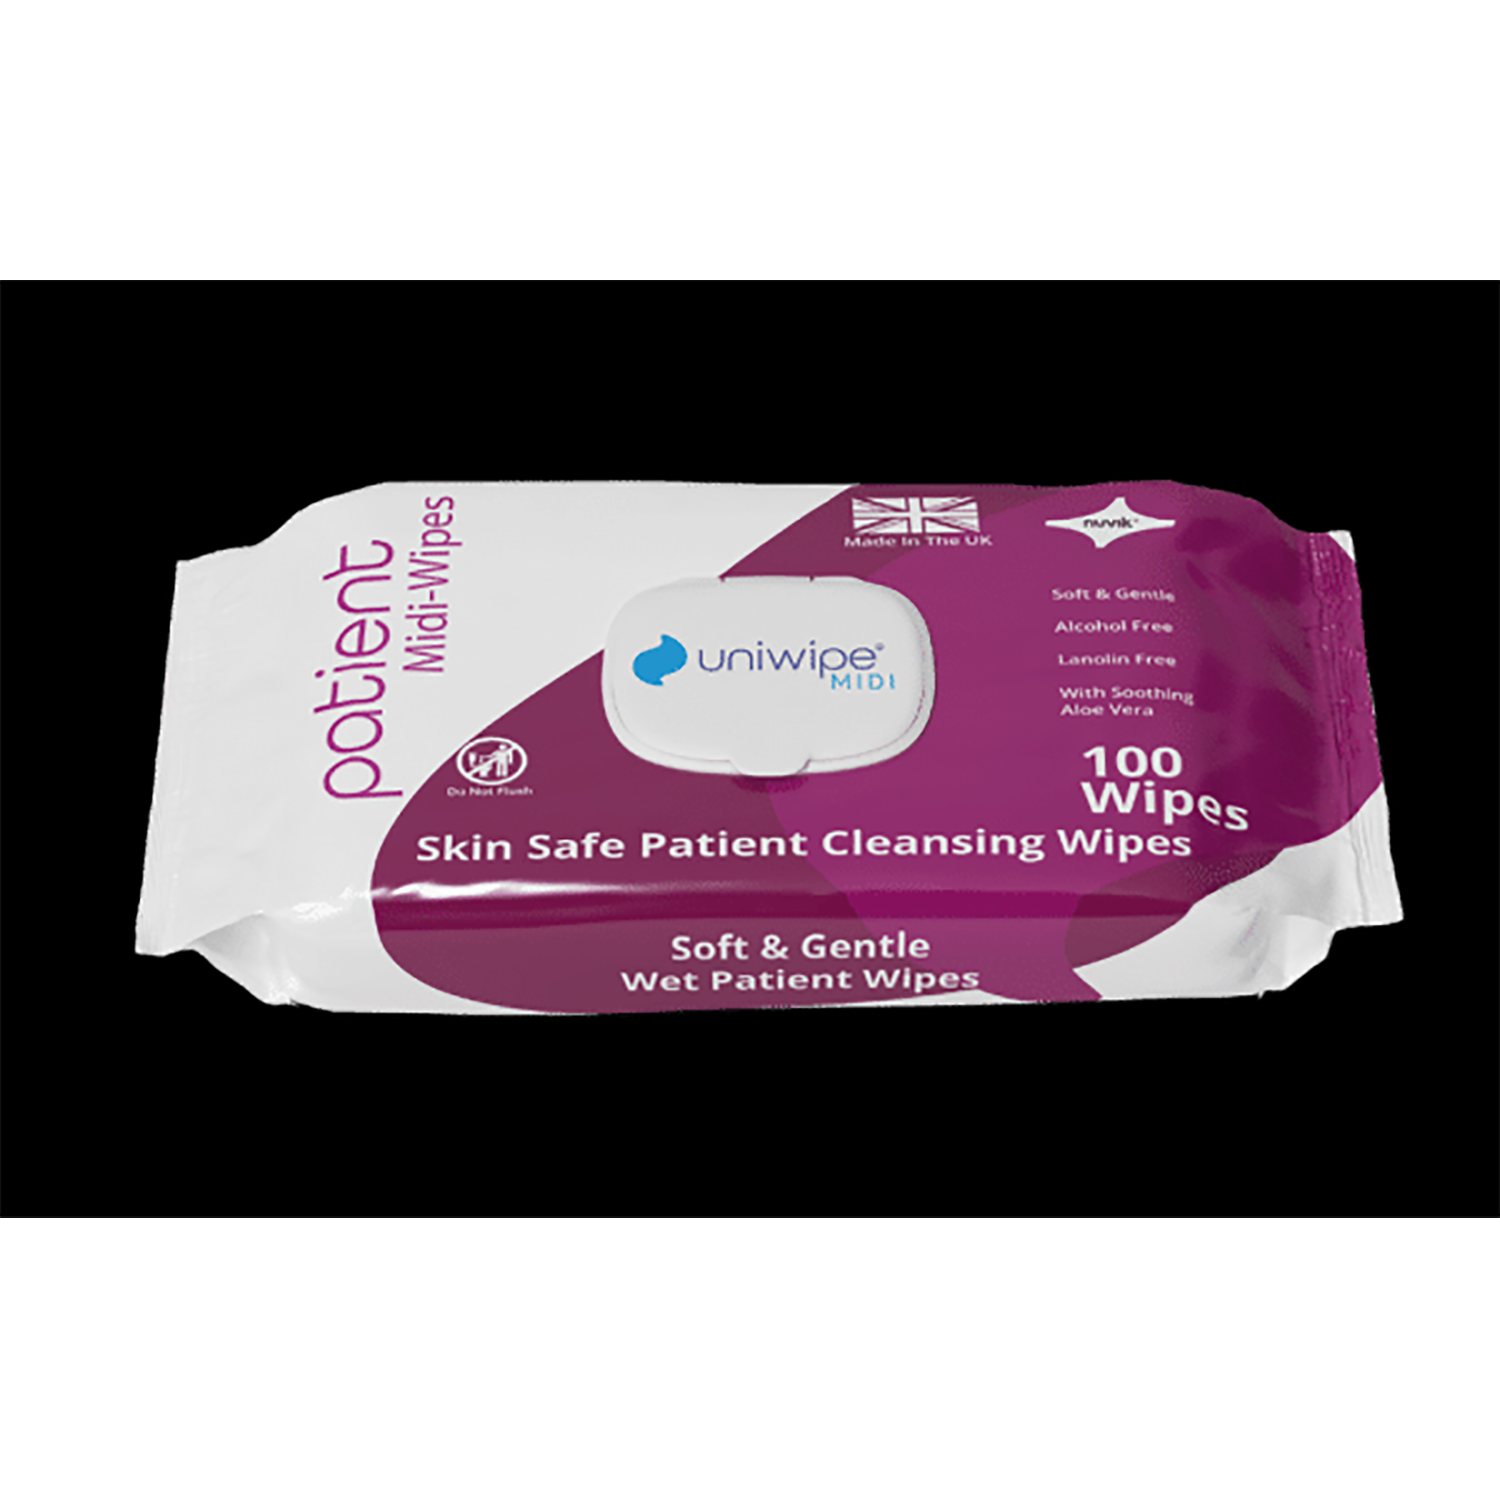 Patient Wipes | Alcohol Free | Pack of 100